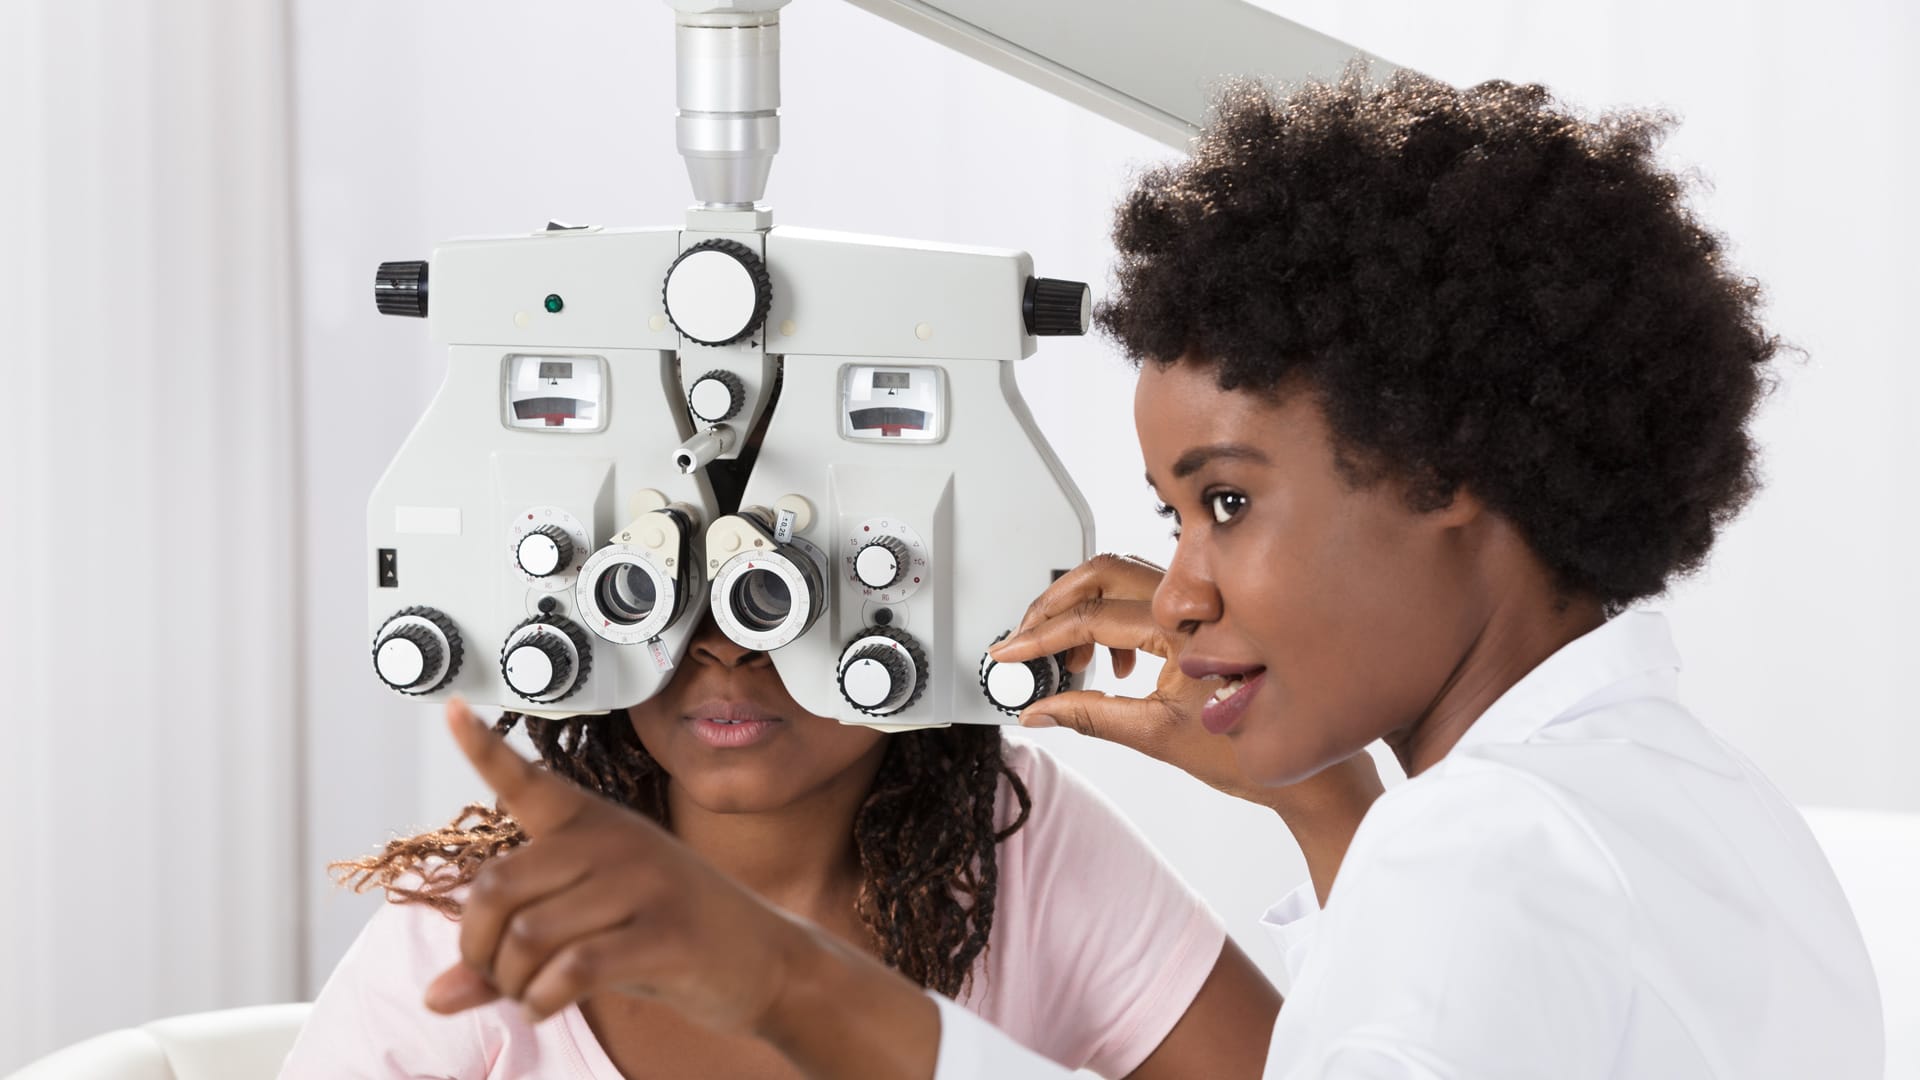 How To Become A Ophthalmologist Career Girls Explore Careers